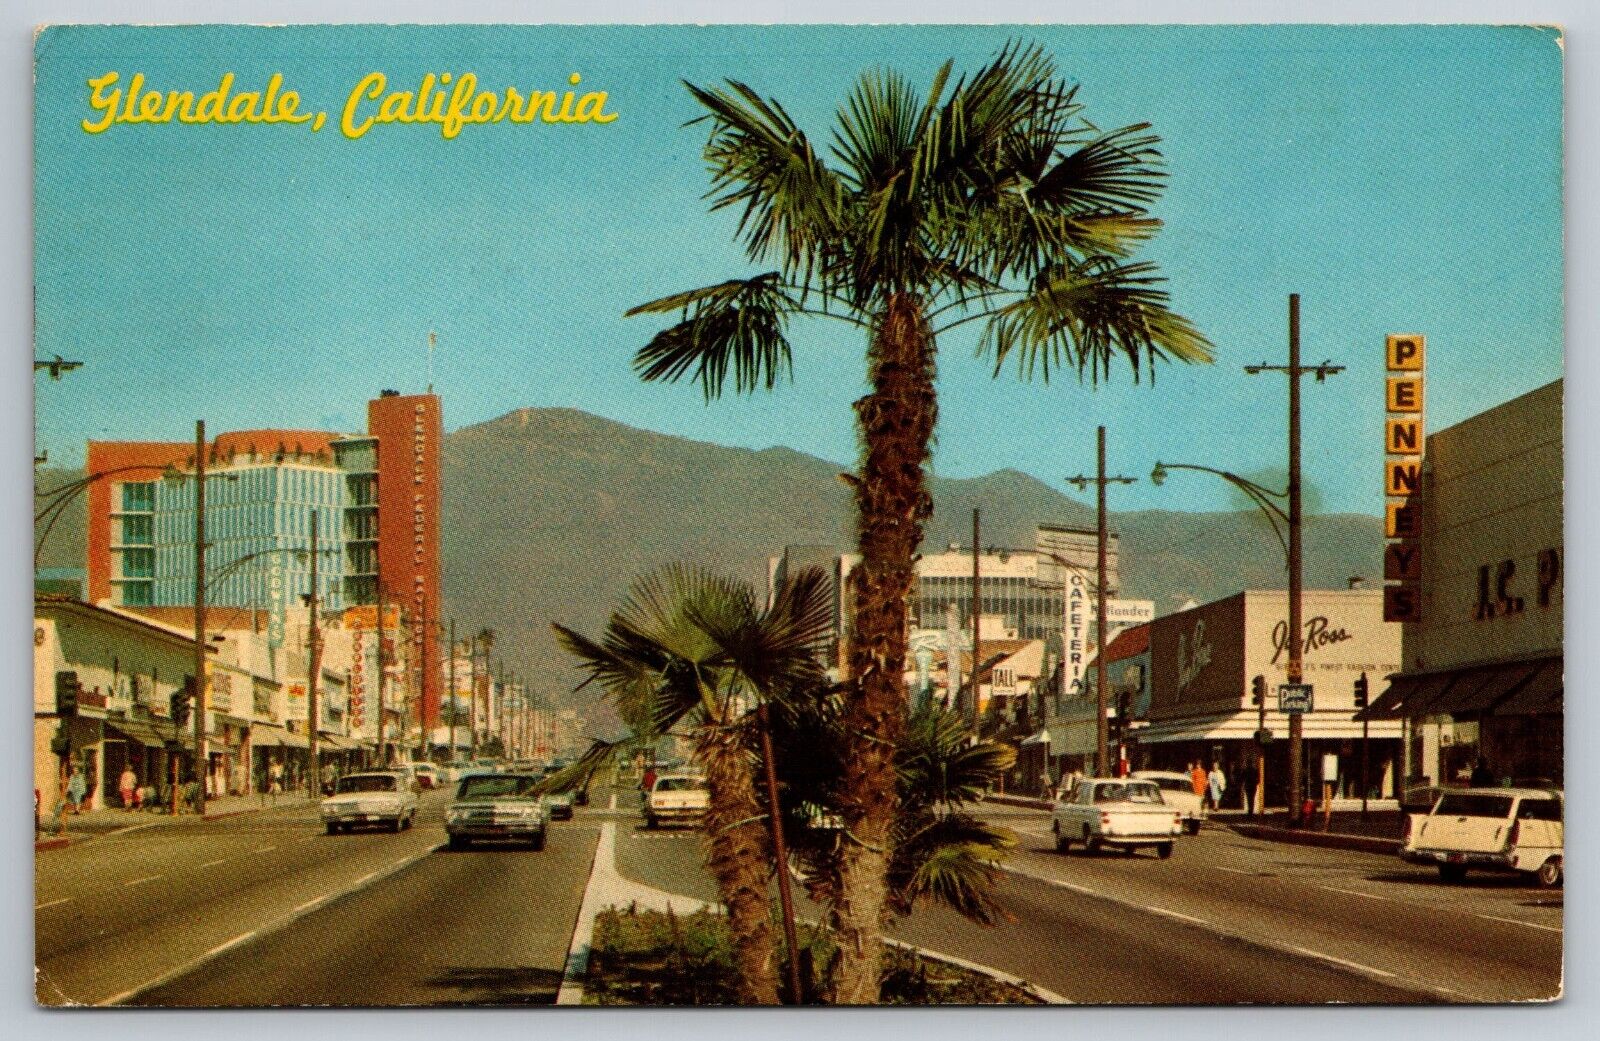 Glendale California Brand Avenue Old Cars Posted 1973 Postcard